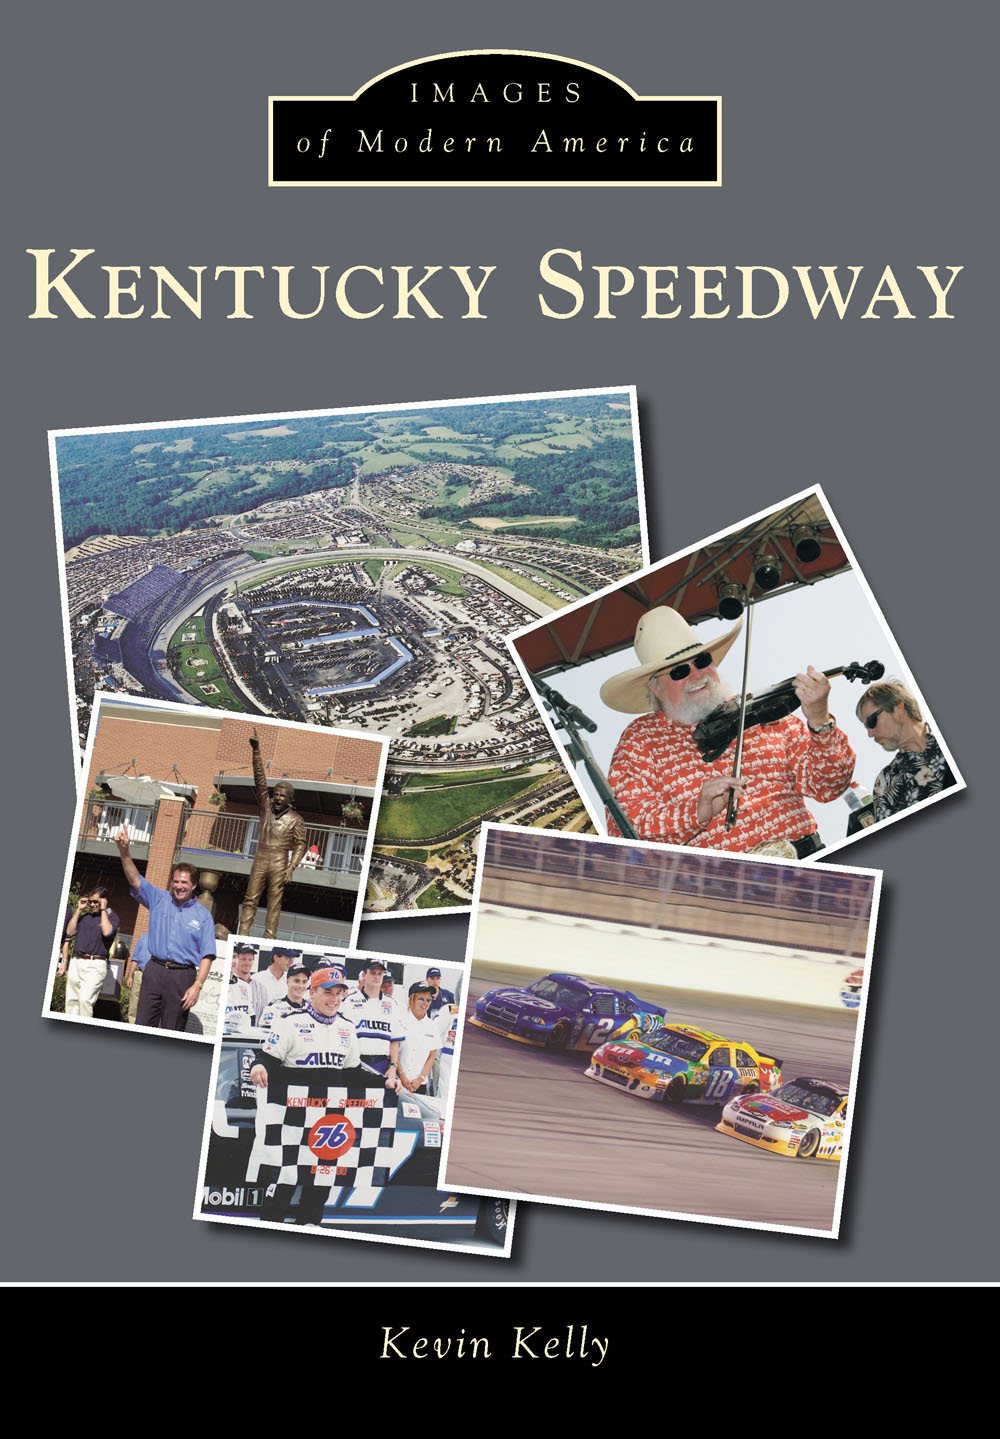 IMAGES of Modern America KENTUCKY SPEEDWAY ON THE FRONT COVER Clockwise - photo 1